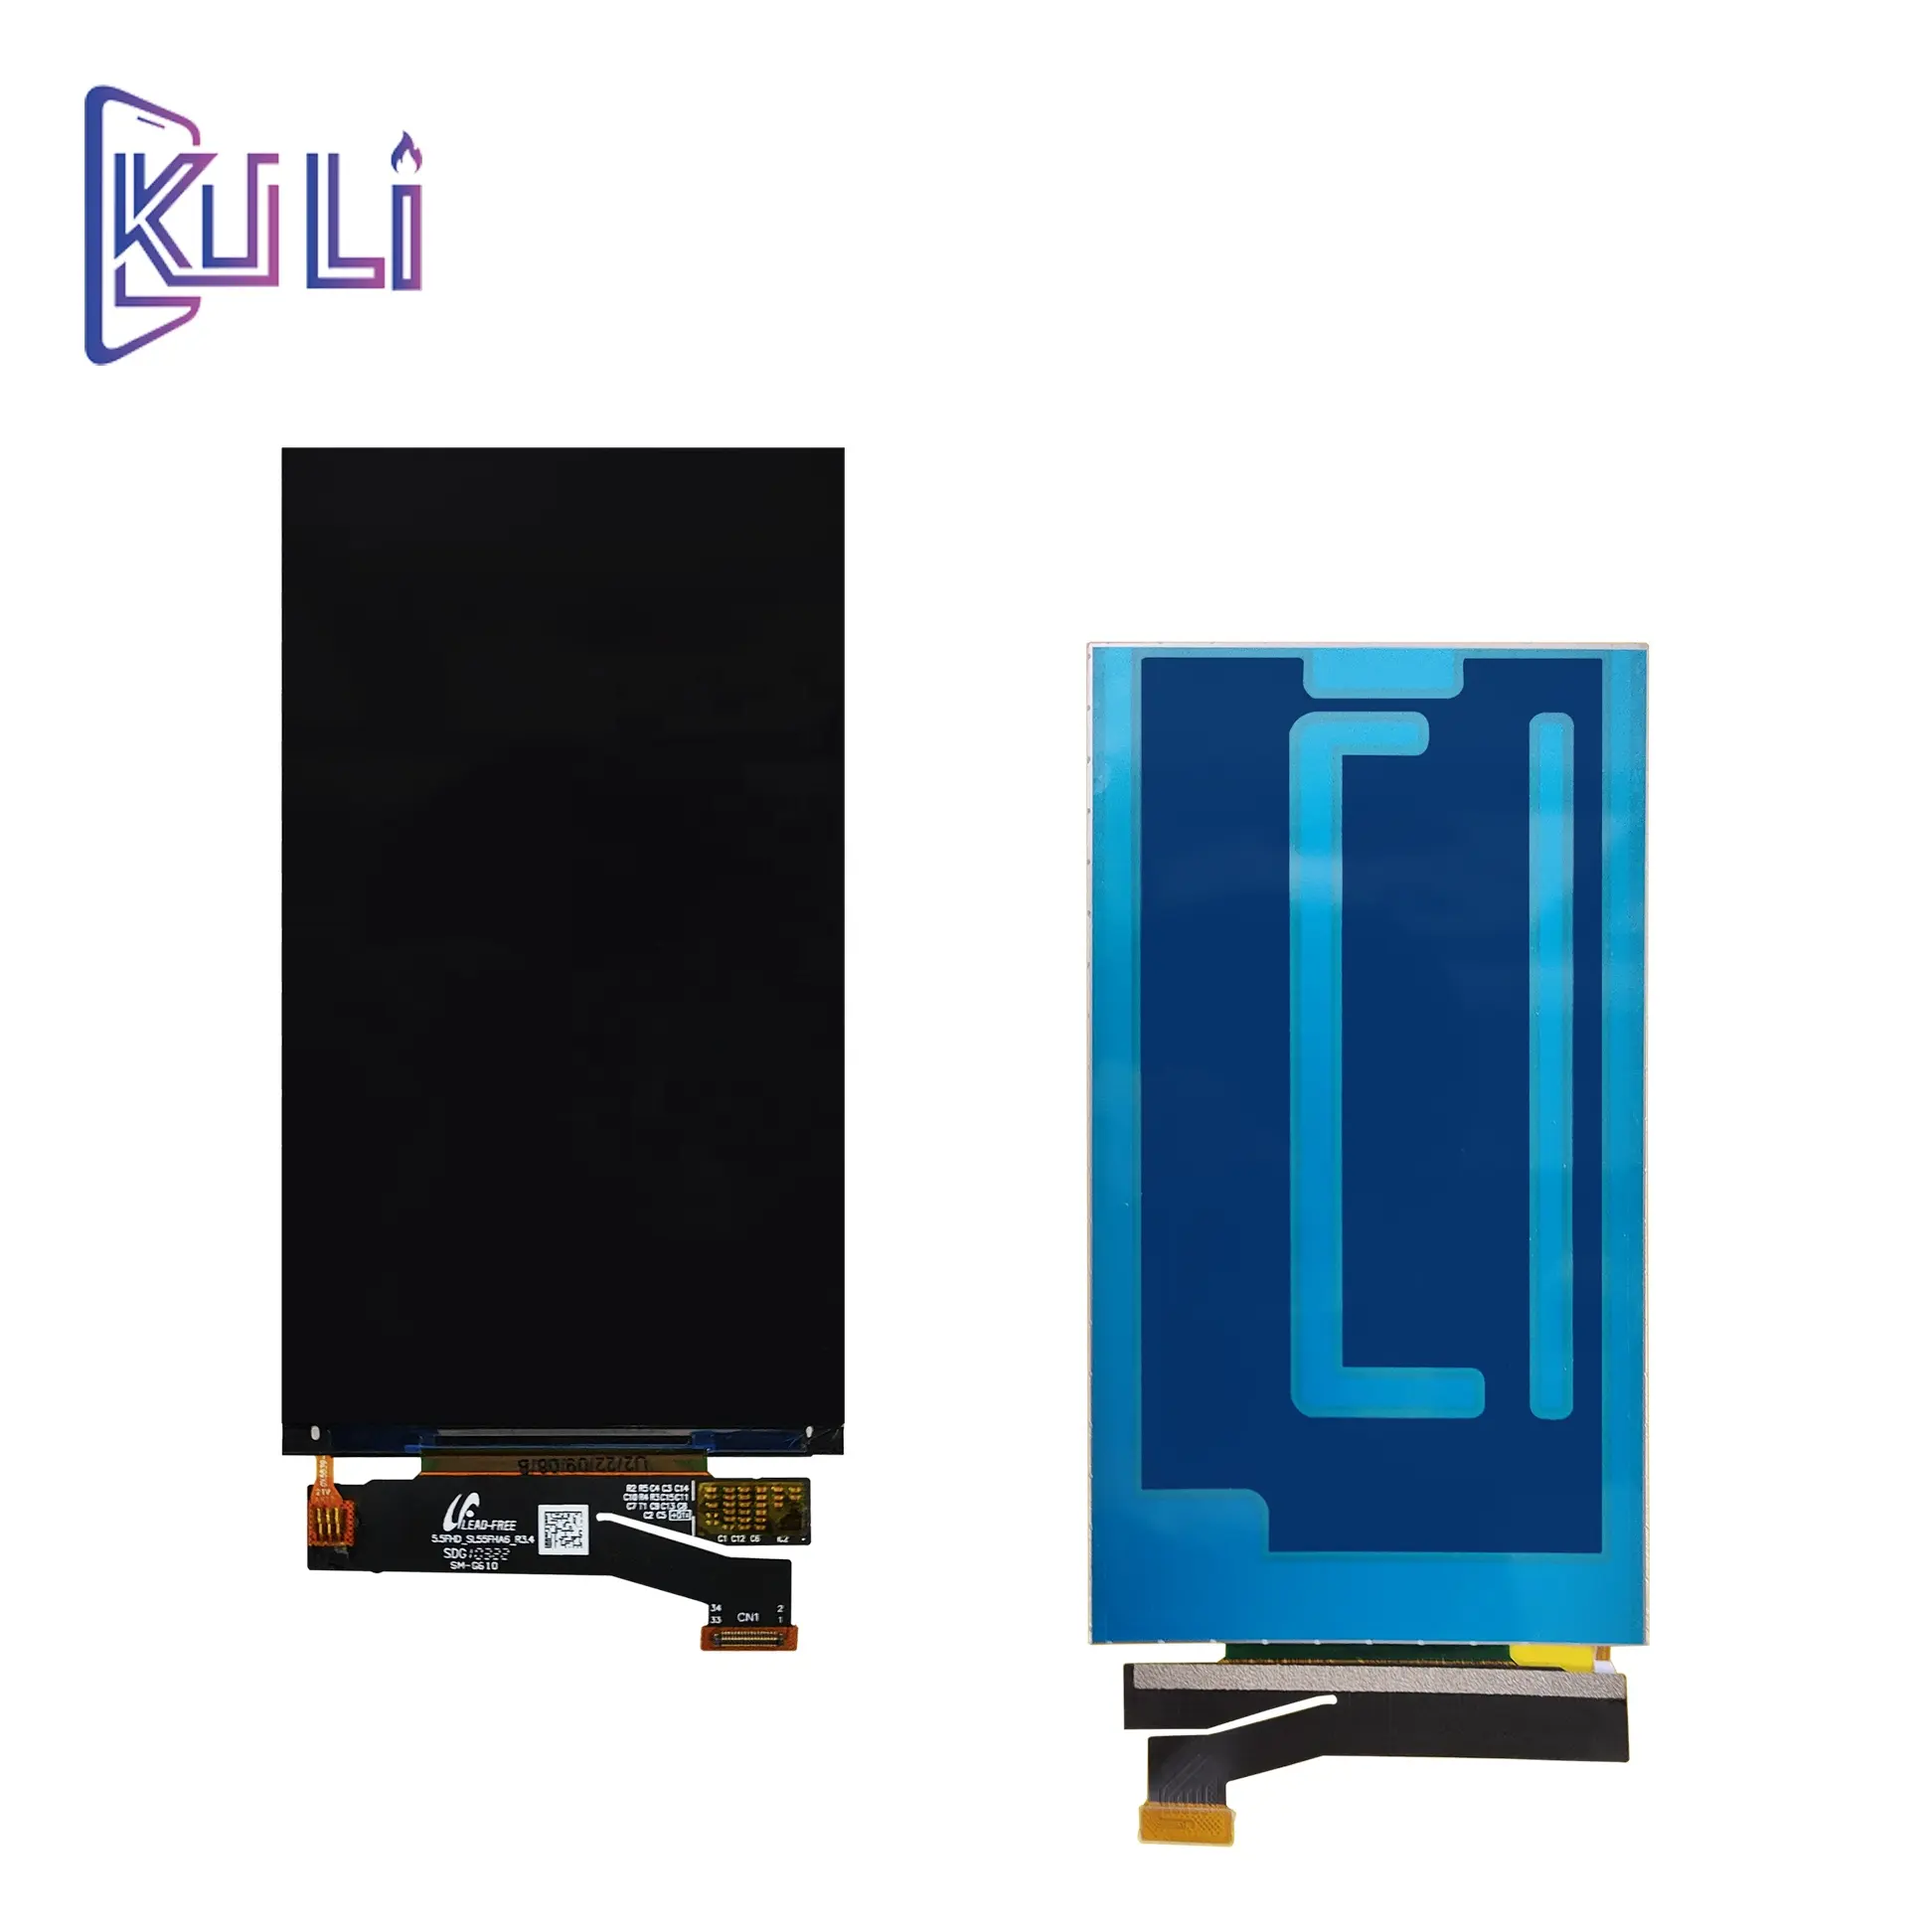 KULI for Samsung J7prime OEM TFT LCD modules 5.5 inch 1920*1080 pixel full viewing angle high brightness backlight lcd modules